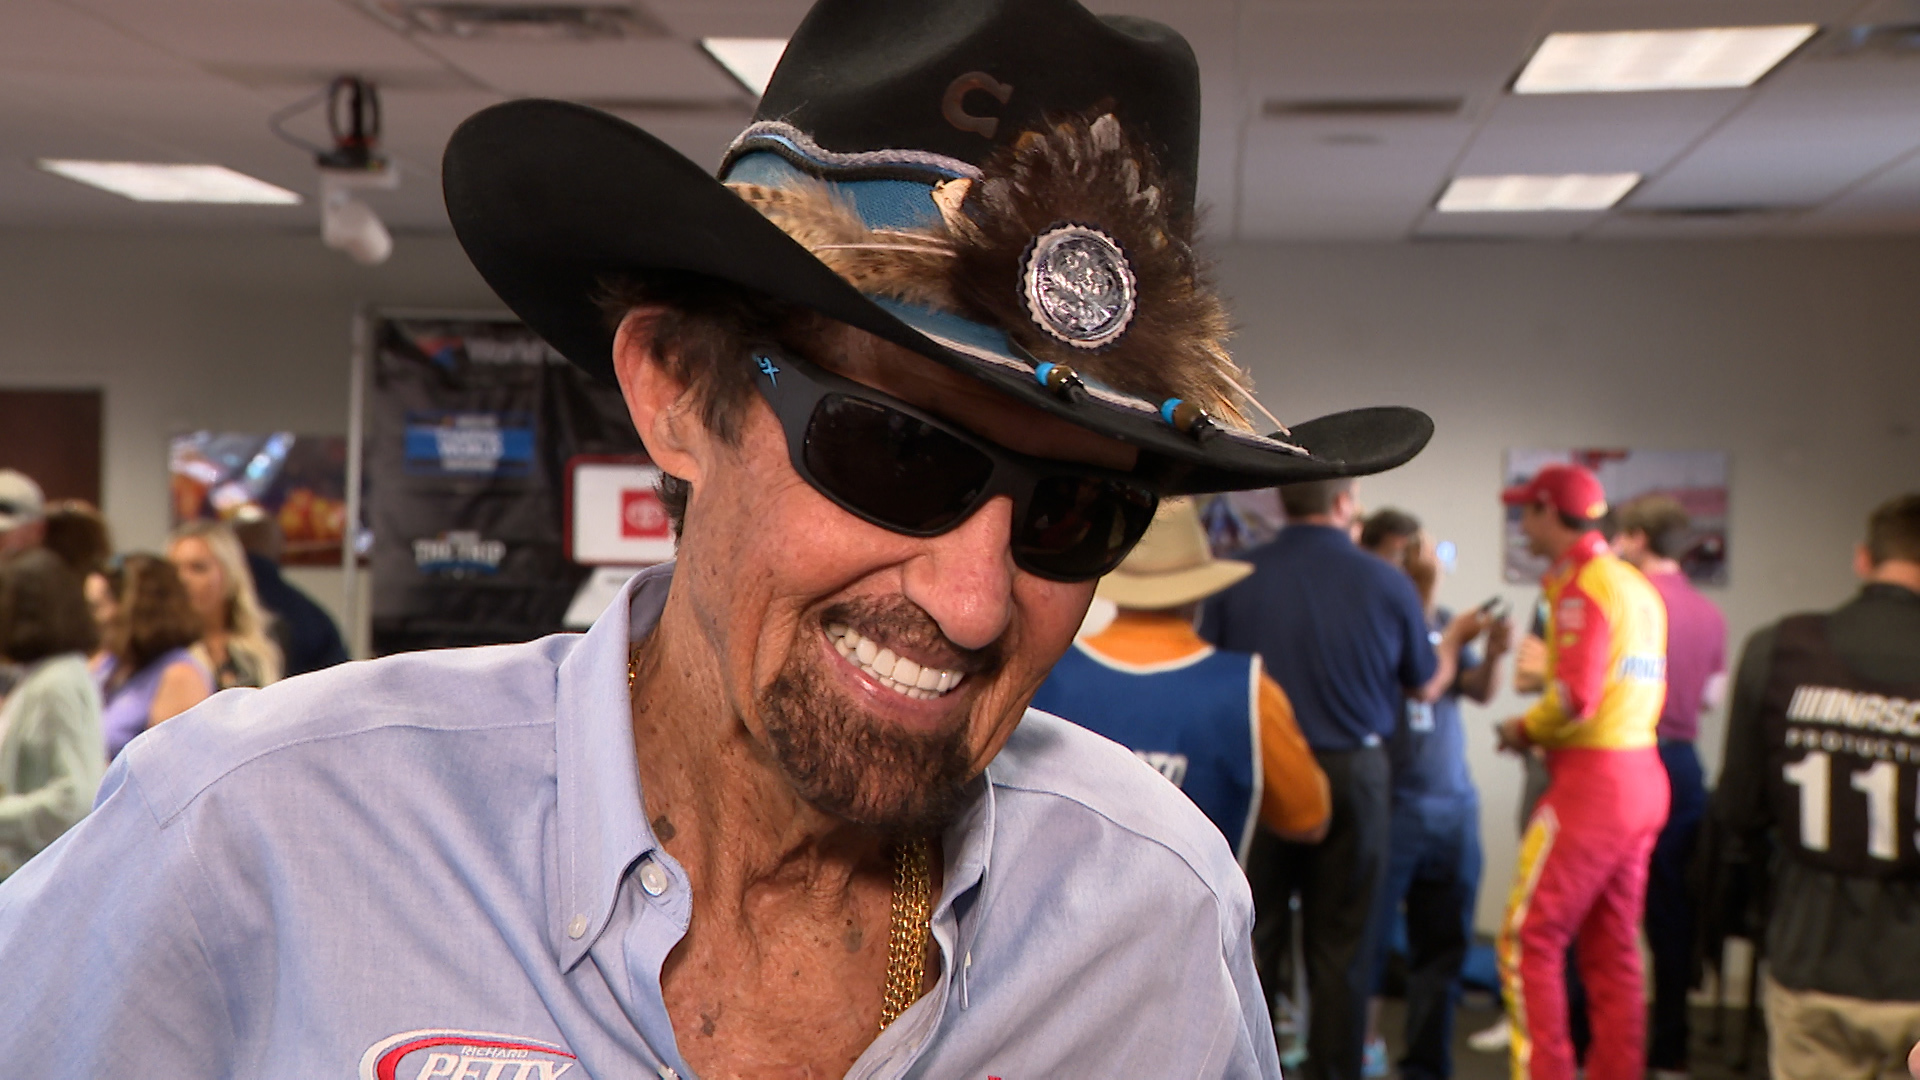 Richard Petty got his own day of honors in St. Louis, and talked about what NASCAR coming to World Wide Technology Raceway means for our town.